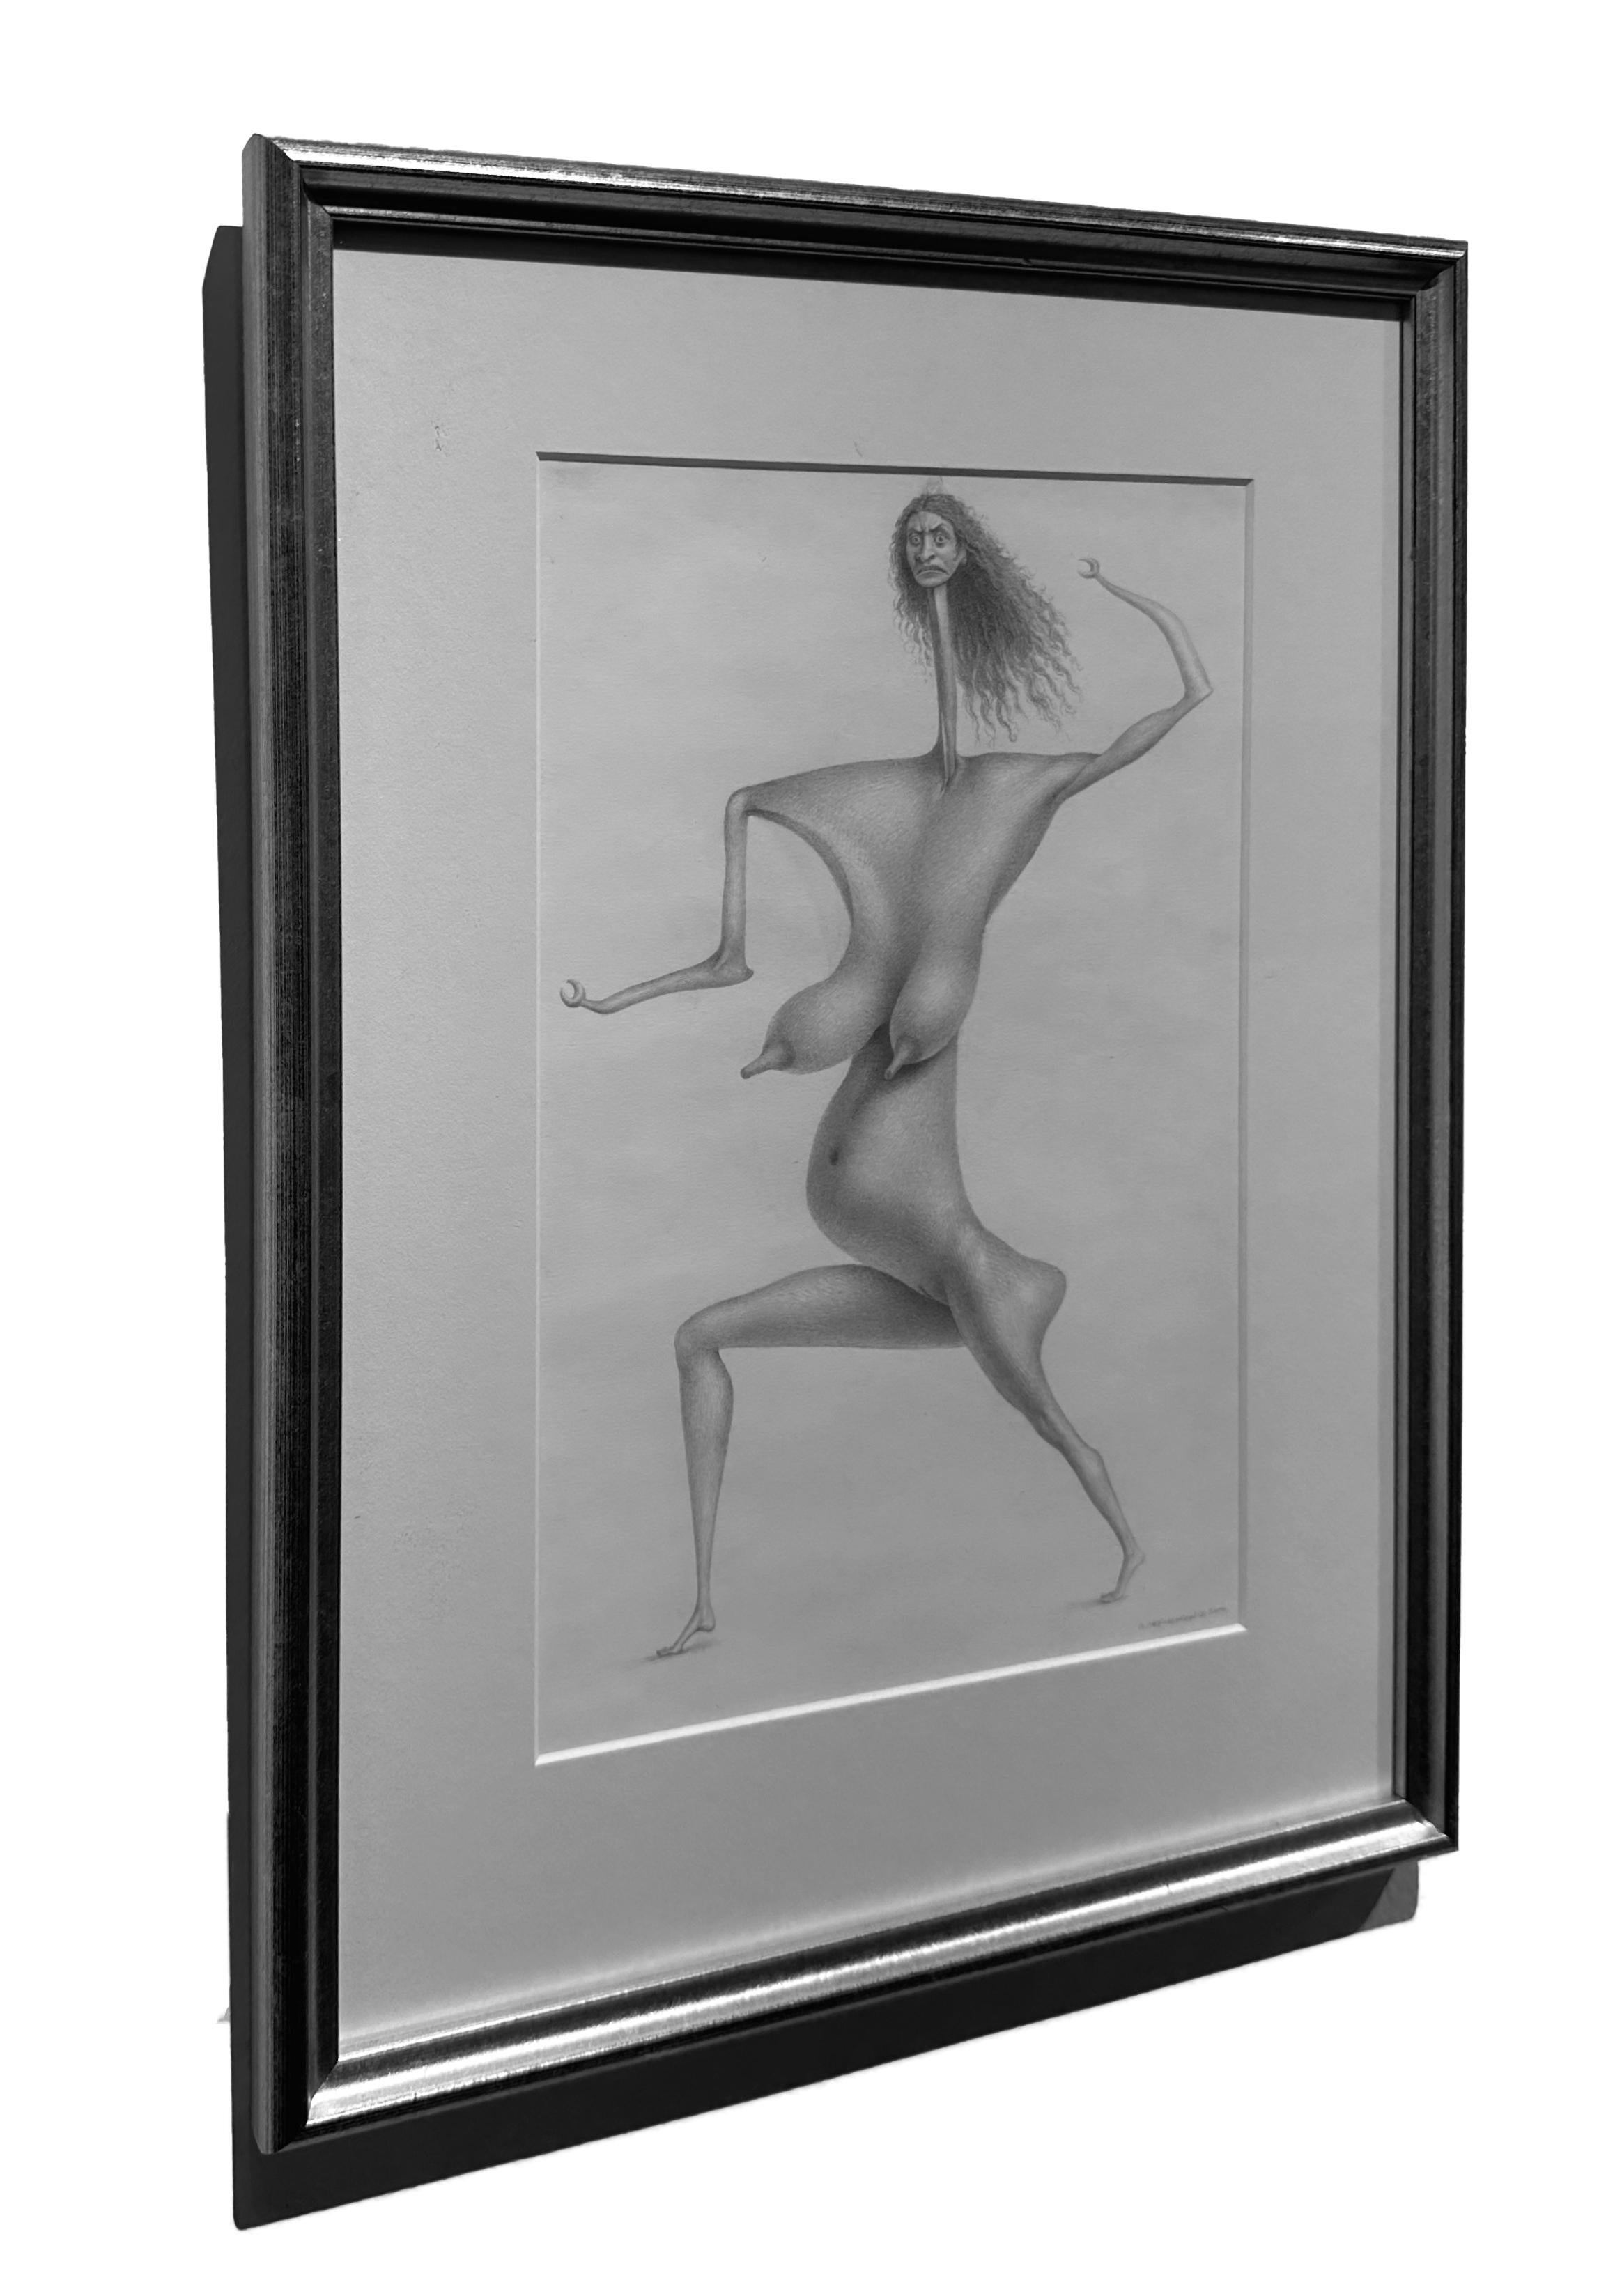 TnT - Surreal Nude Figure, Fine Point Graphite Drawiing, Matted and Framed - Contemporary Print by Oliver Hazard Benson